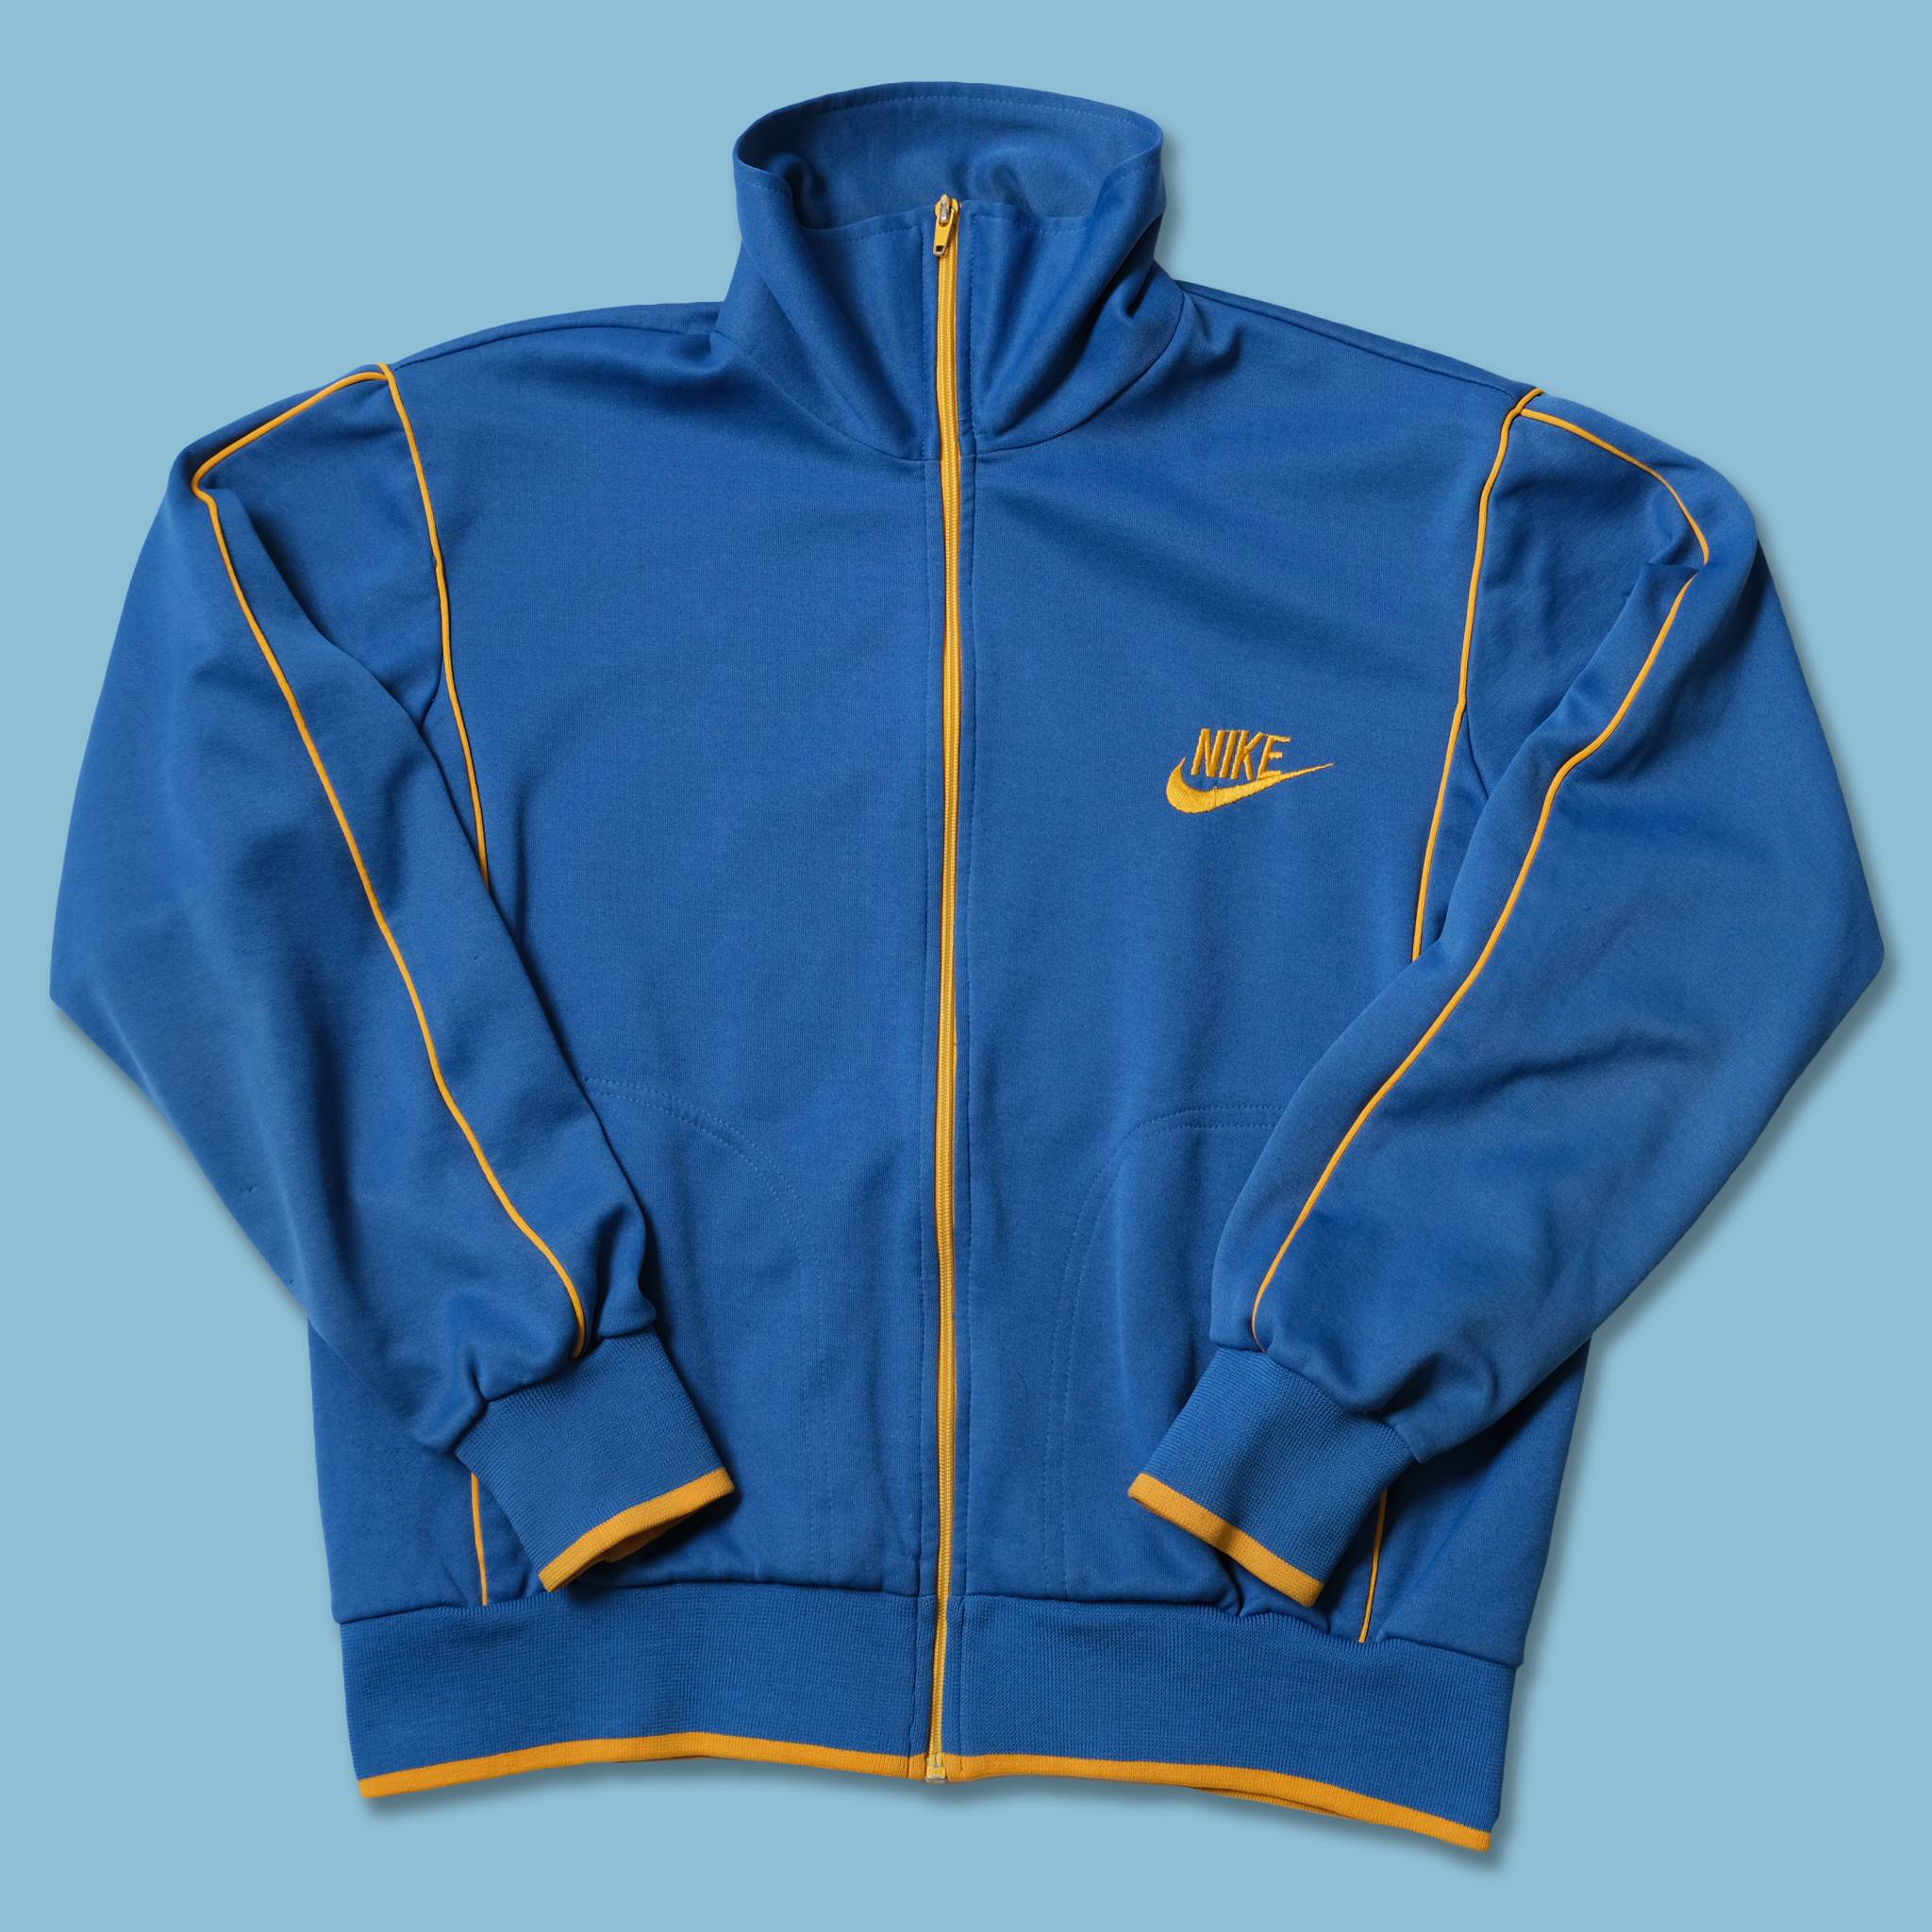 NIKE 70's track jacket made in USA - ジャージ